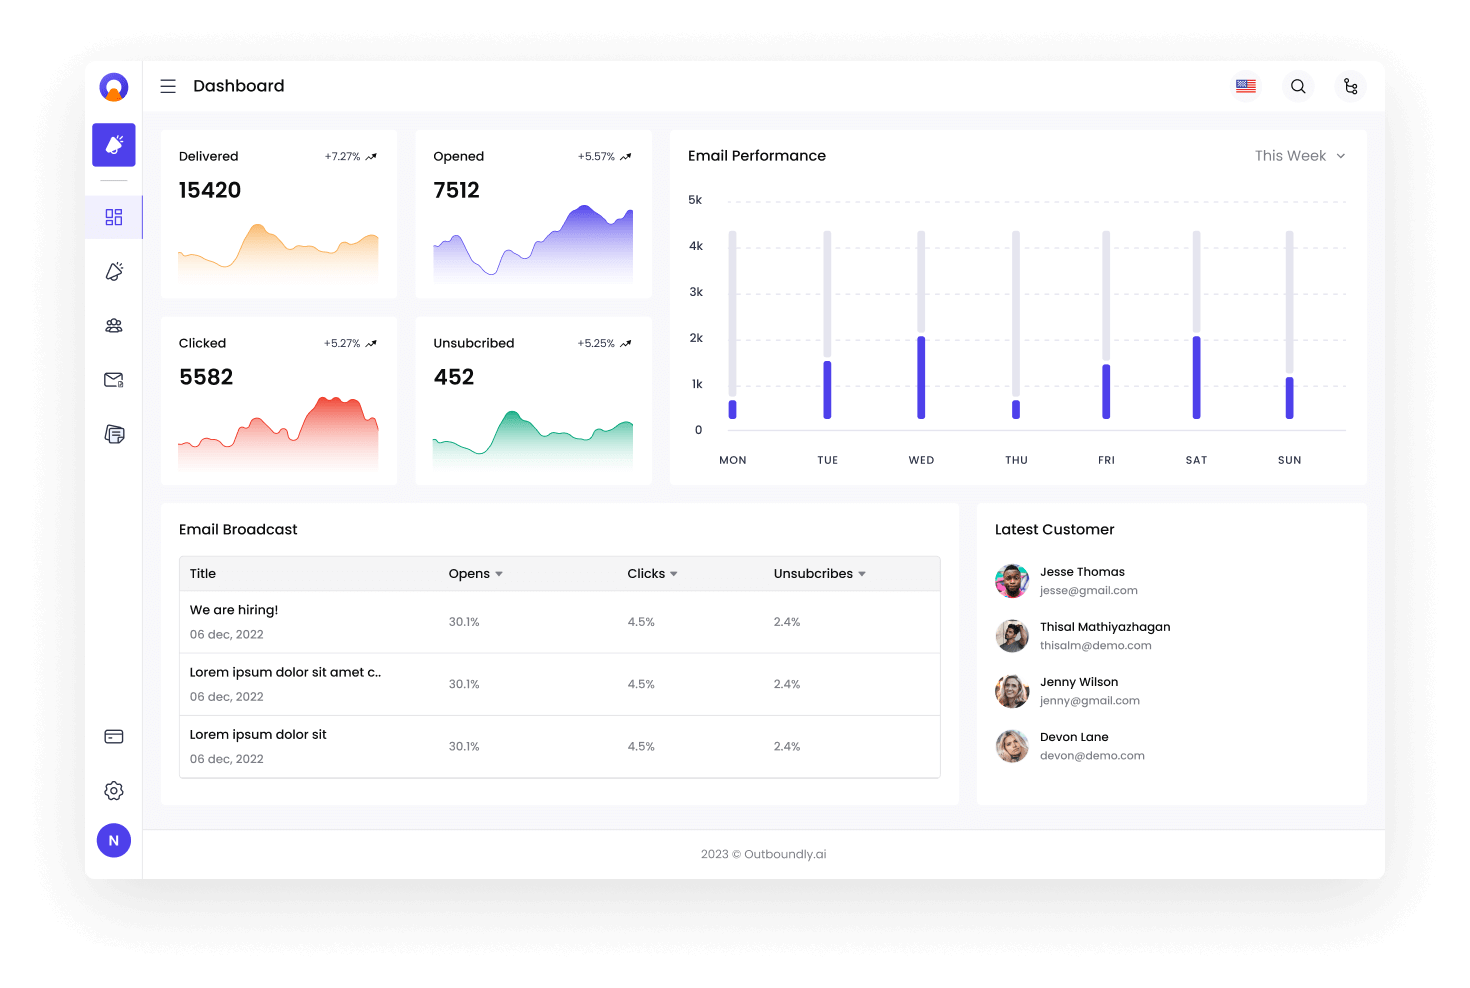 Outboundly.ai dashboard image